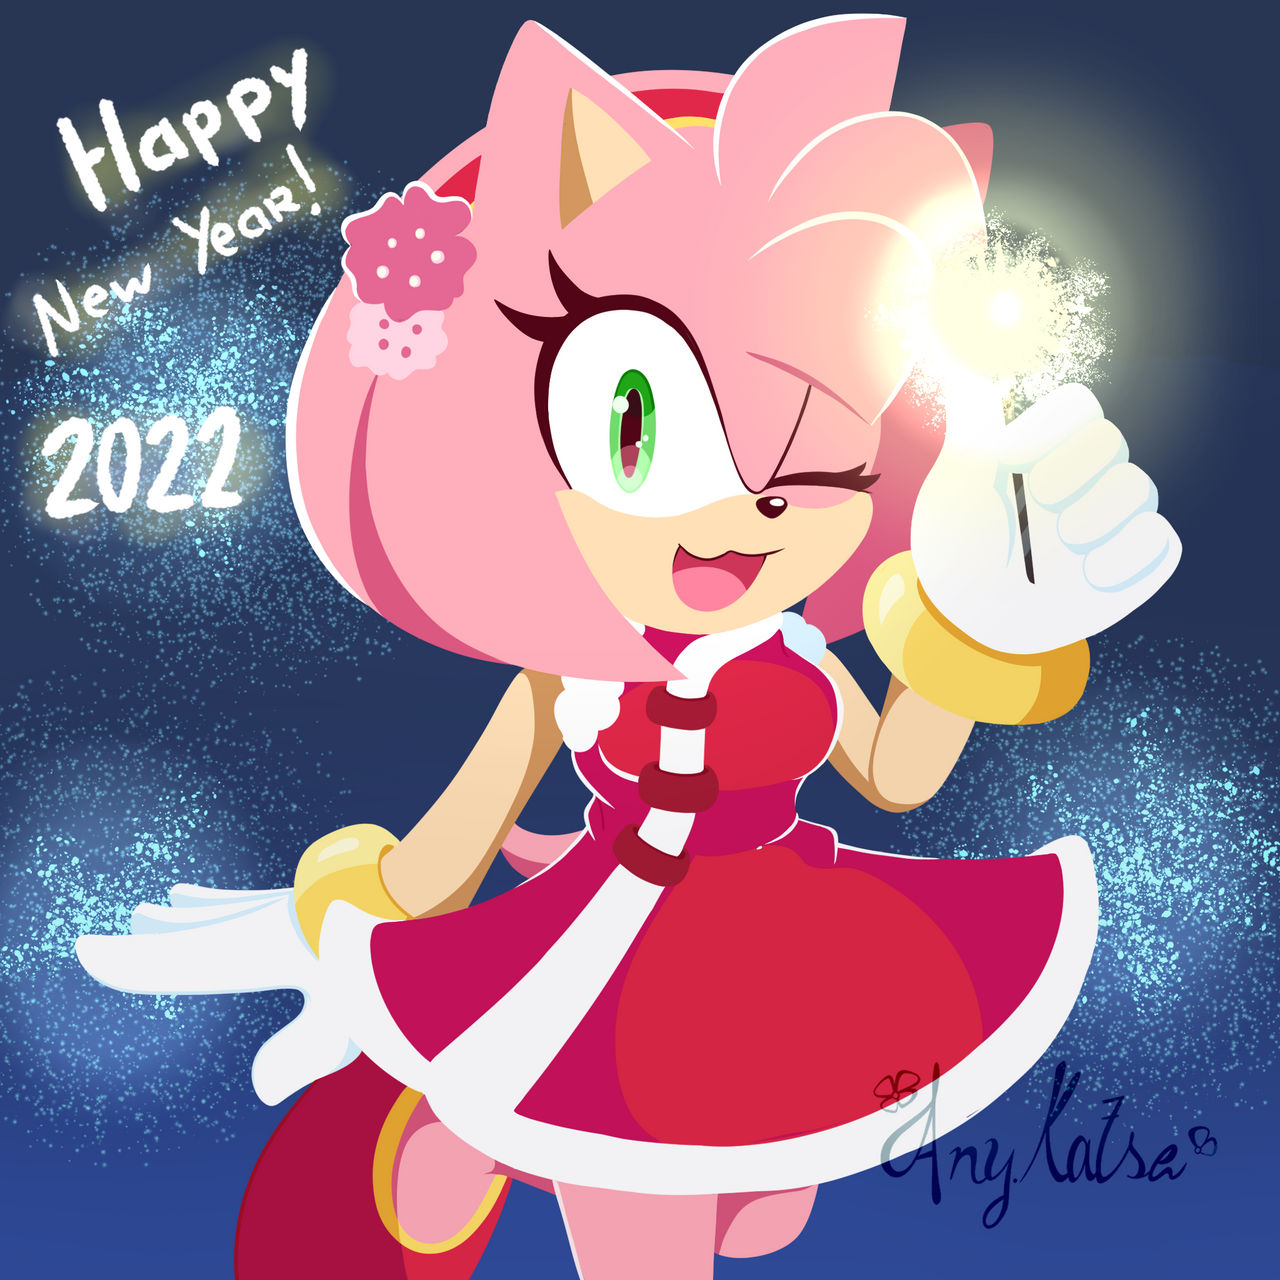 Happy new year AMY ROSE by Andreacami on DeviantArt